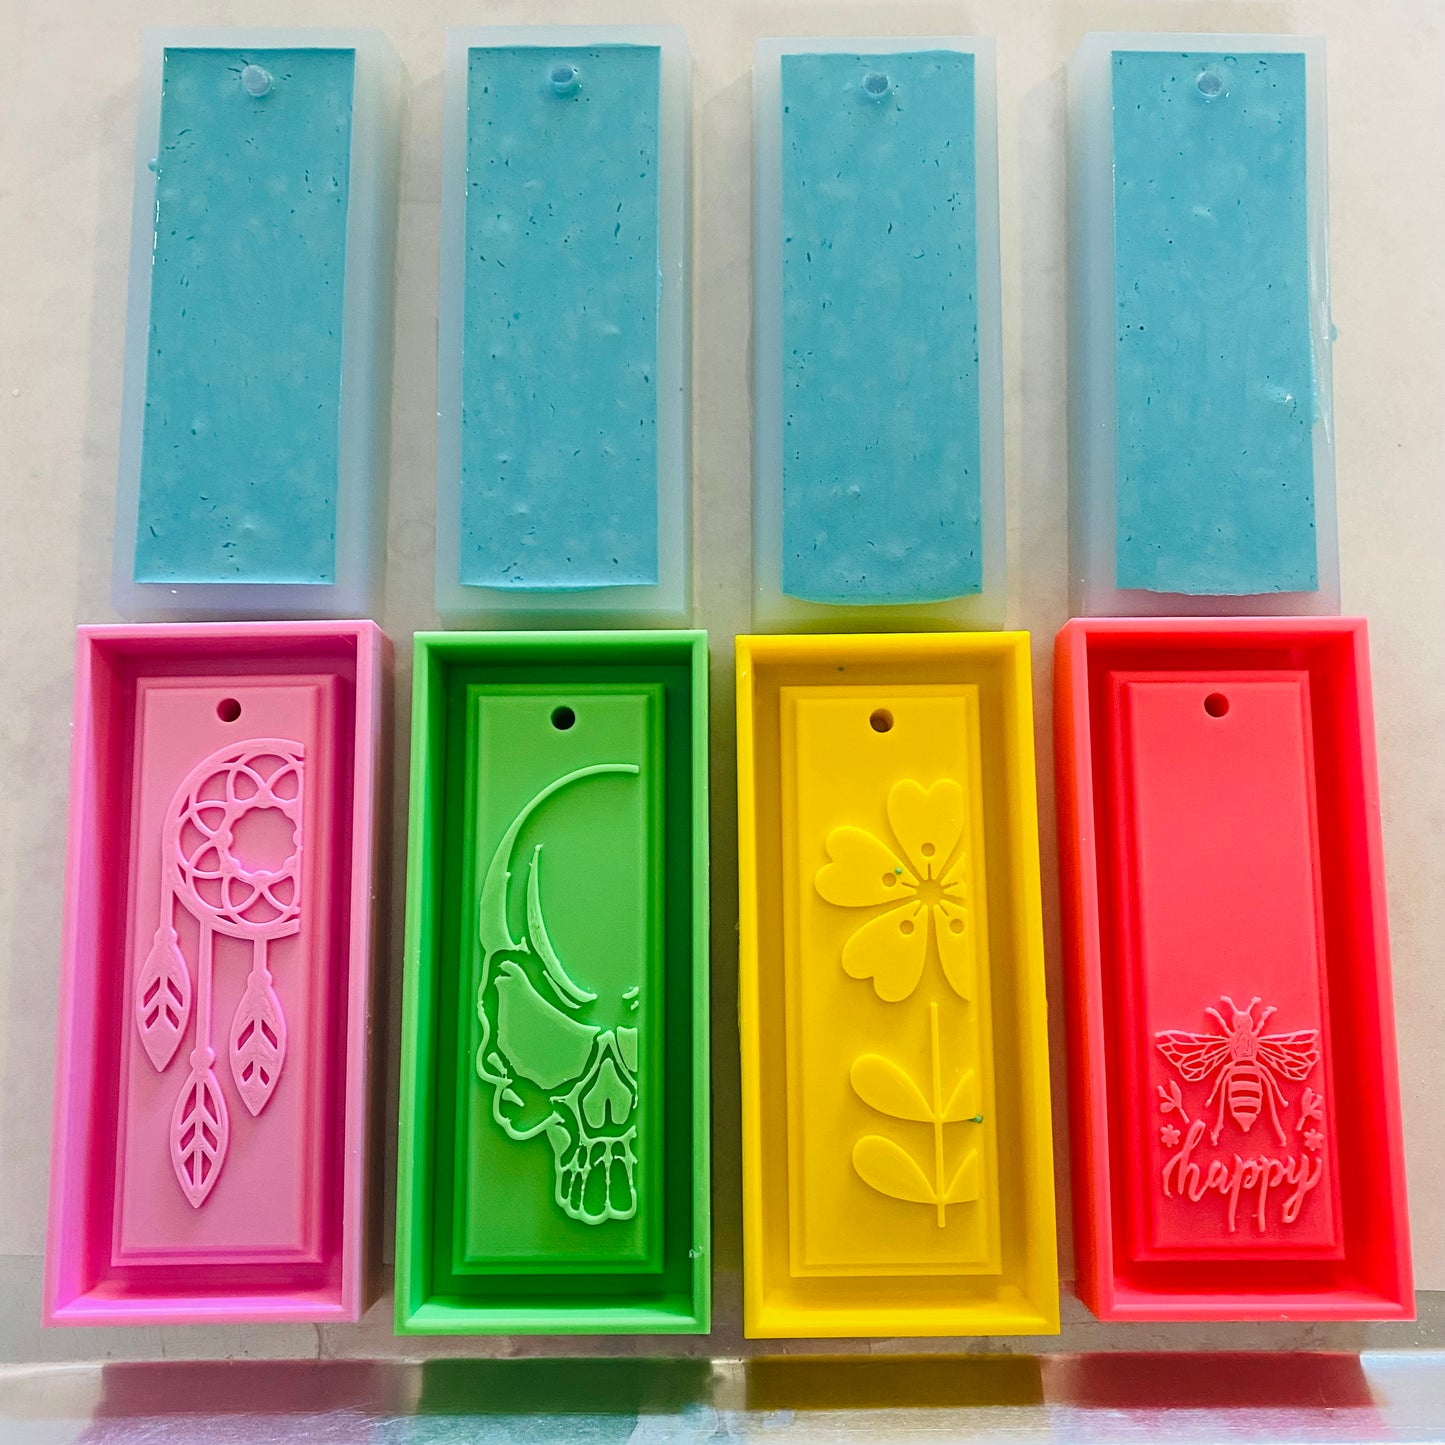 Car & Wardrobe Scent Hanger Moulds and Recipe**